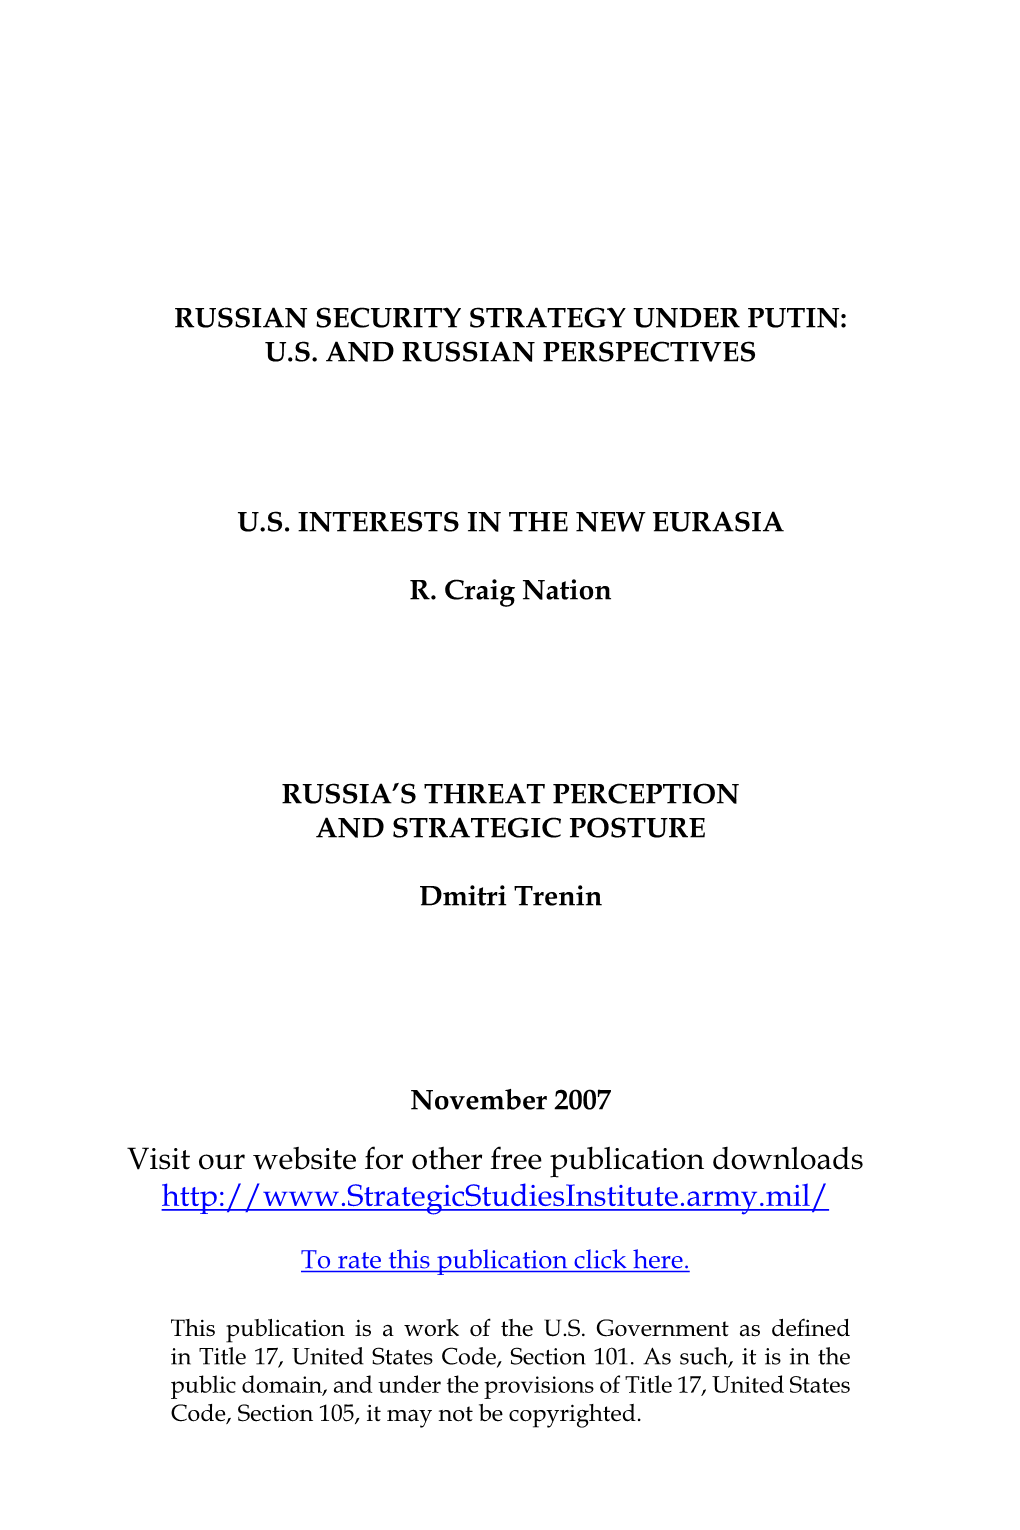 Russian Security Strategy Under Putin: US and Russian Perspectives